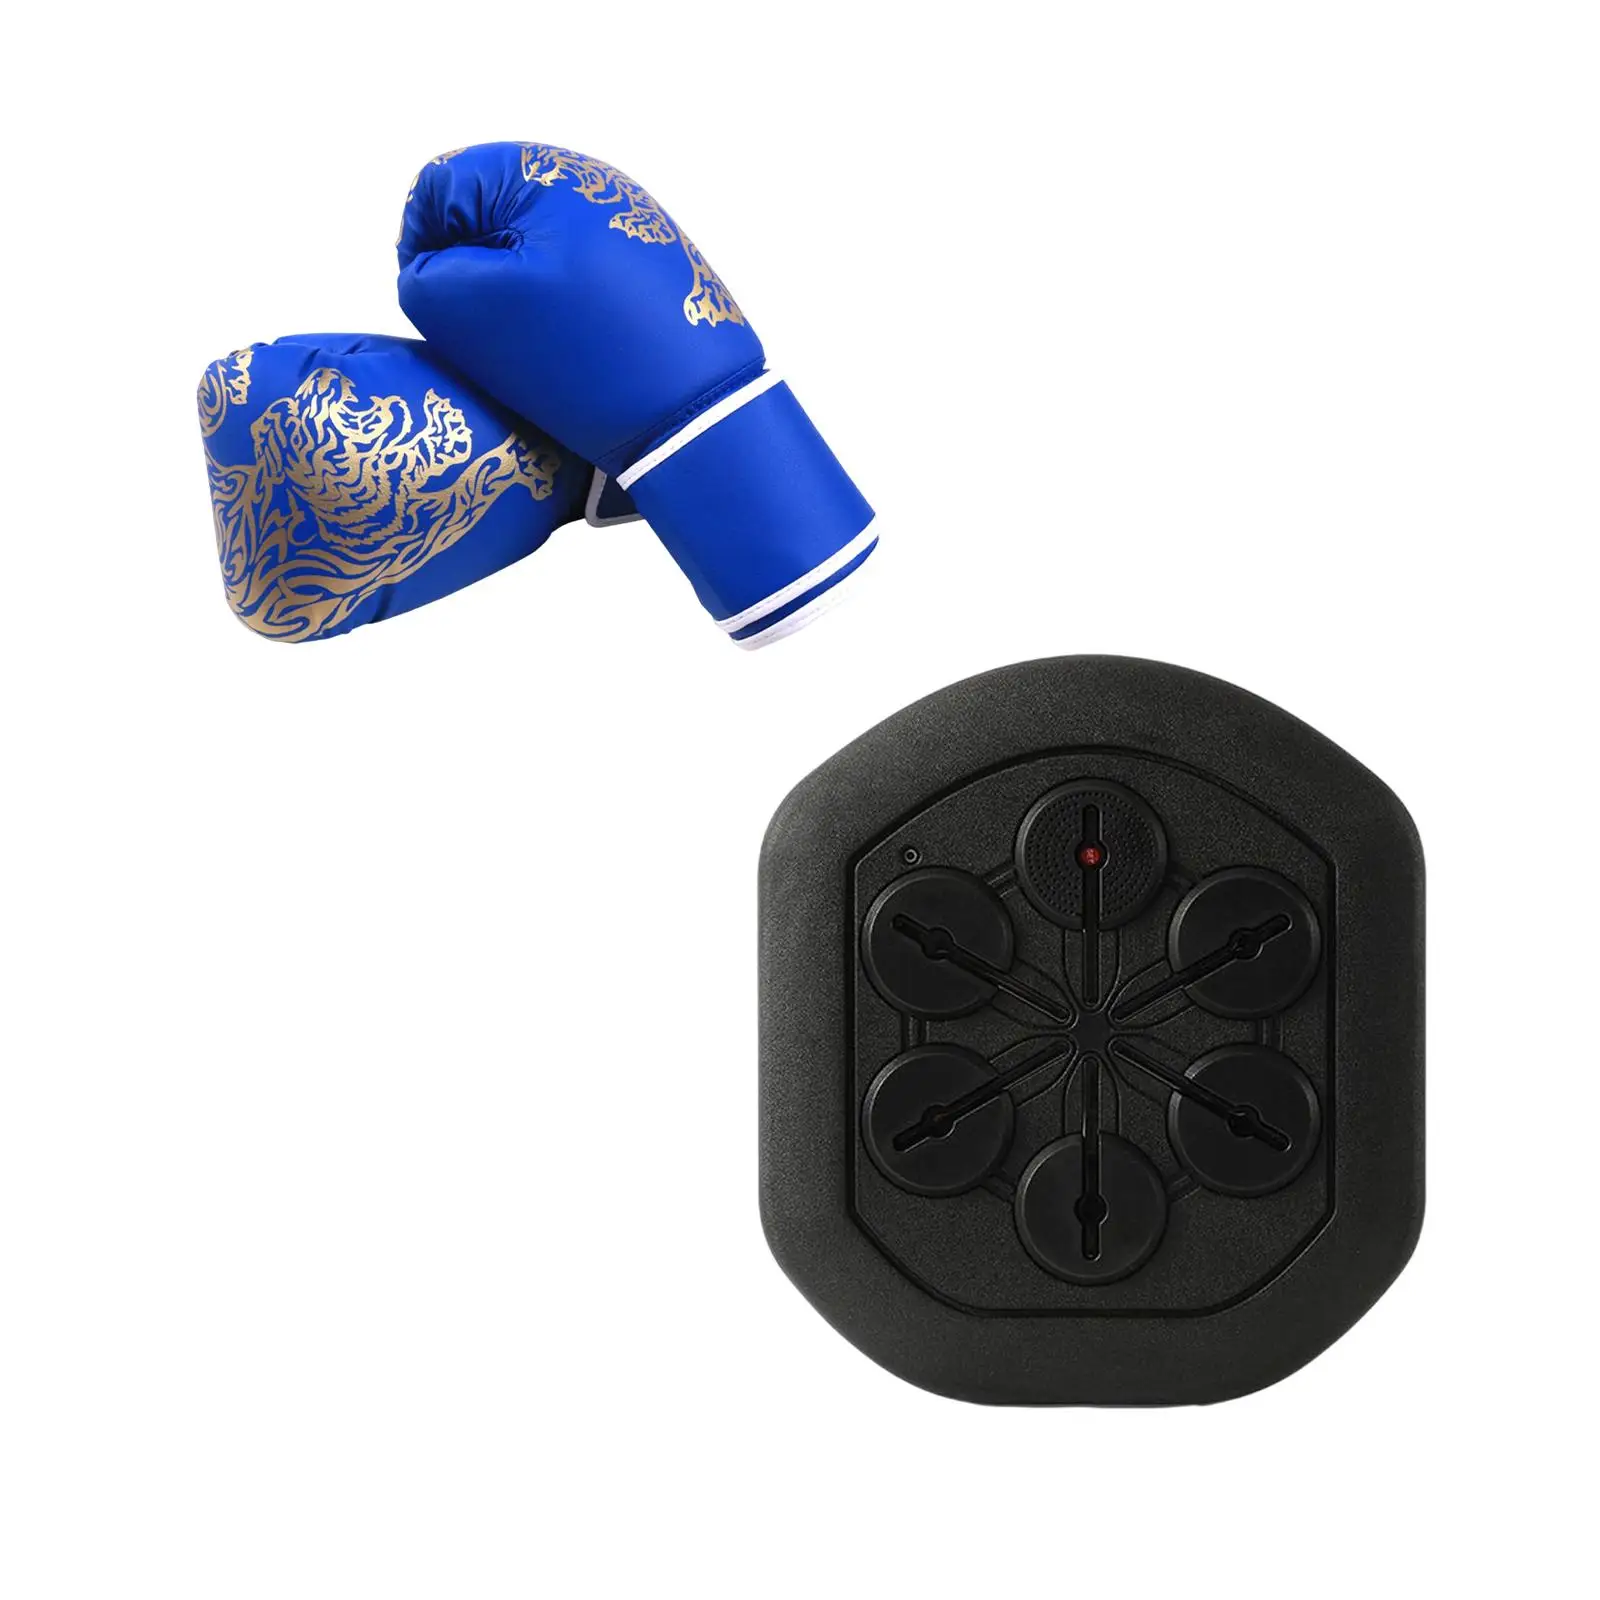 Smart Boxing Wall Target Reaction Target Wall Mounted Boxing Practice